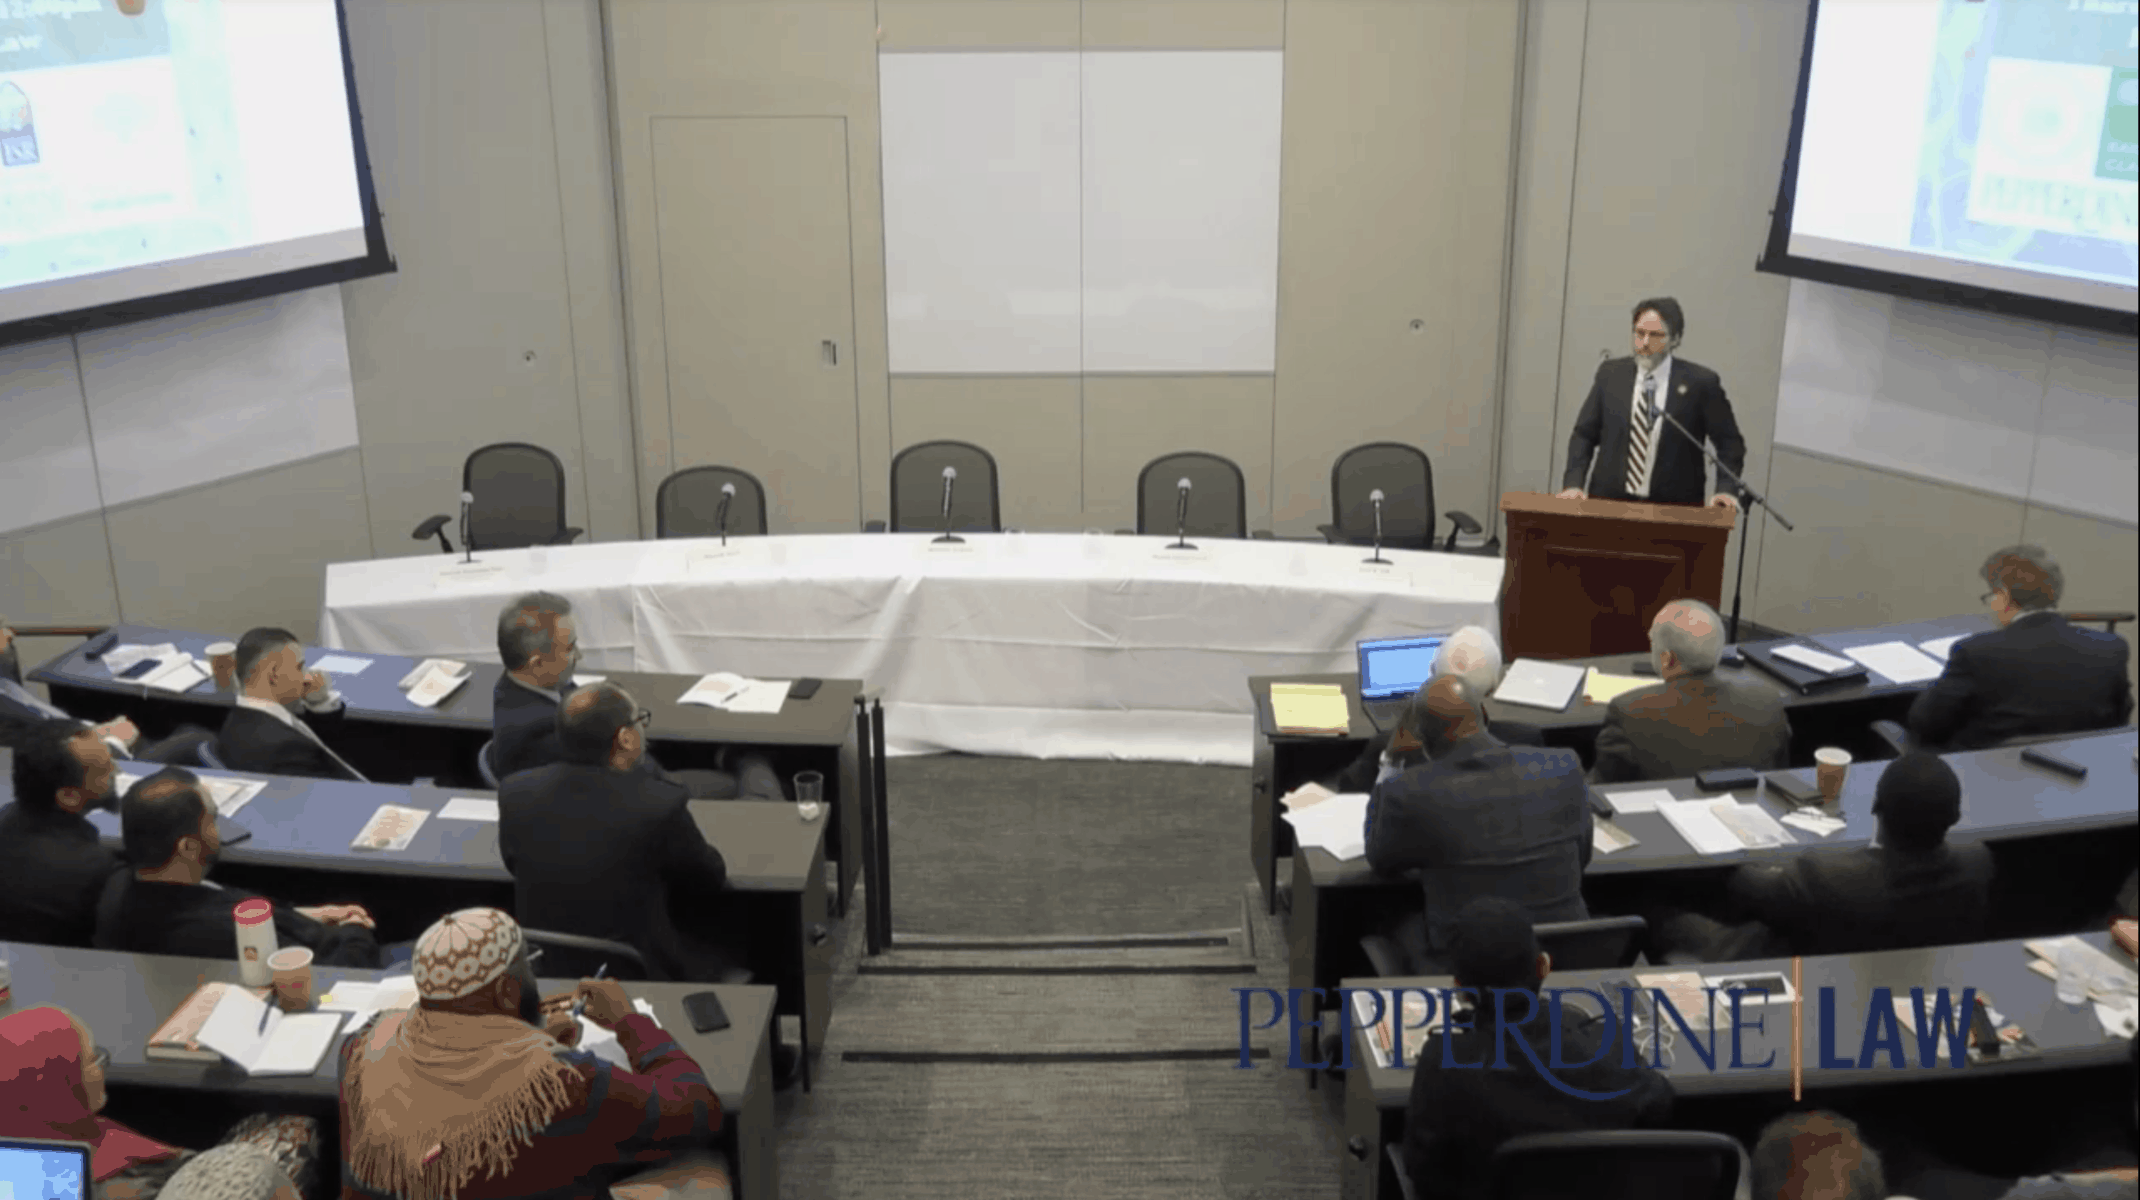 Hamza Yusuf – An Islamic Case for Pluralism, Equal Citizenship, and Religious